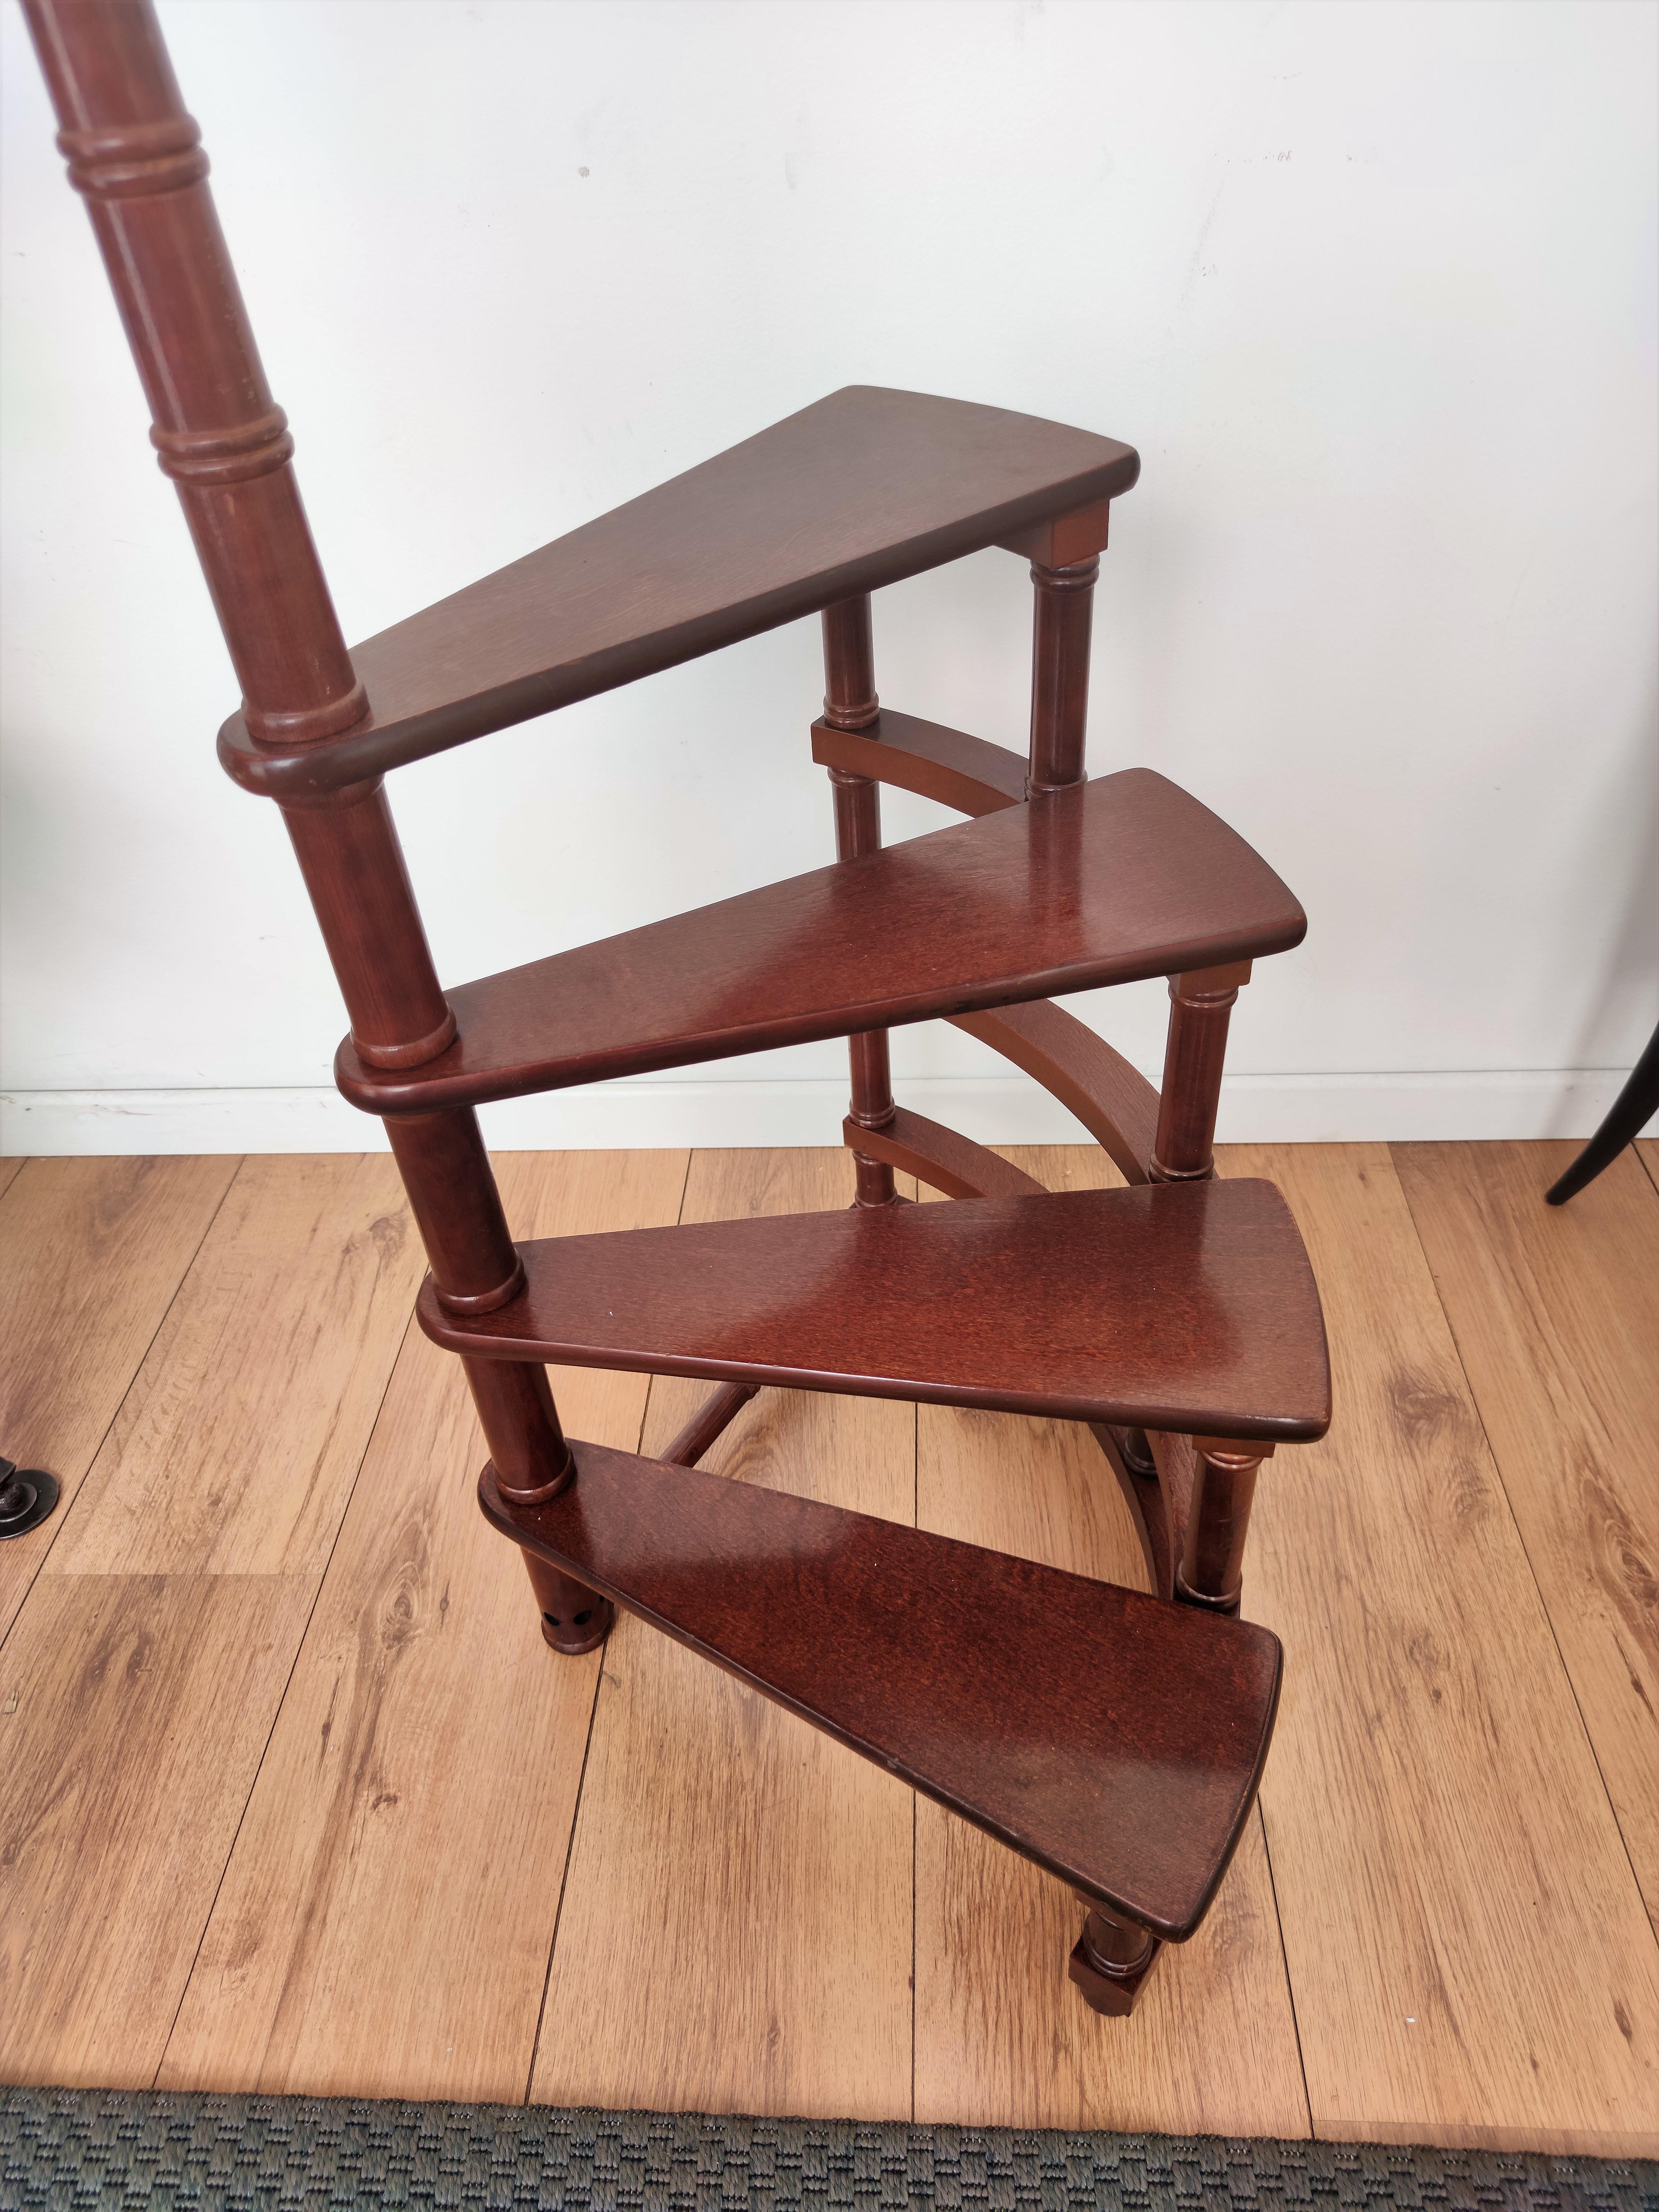 Beautiful Italian carved walnut wood tall circular step ladder with four stairs rolled around a turned, central post embellished with a decorative finial. Versatile and practical, the elegant library essential is in excellent condition with a rich